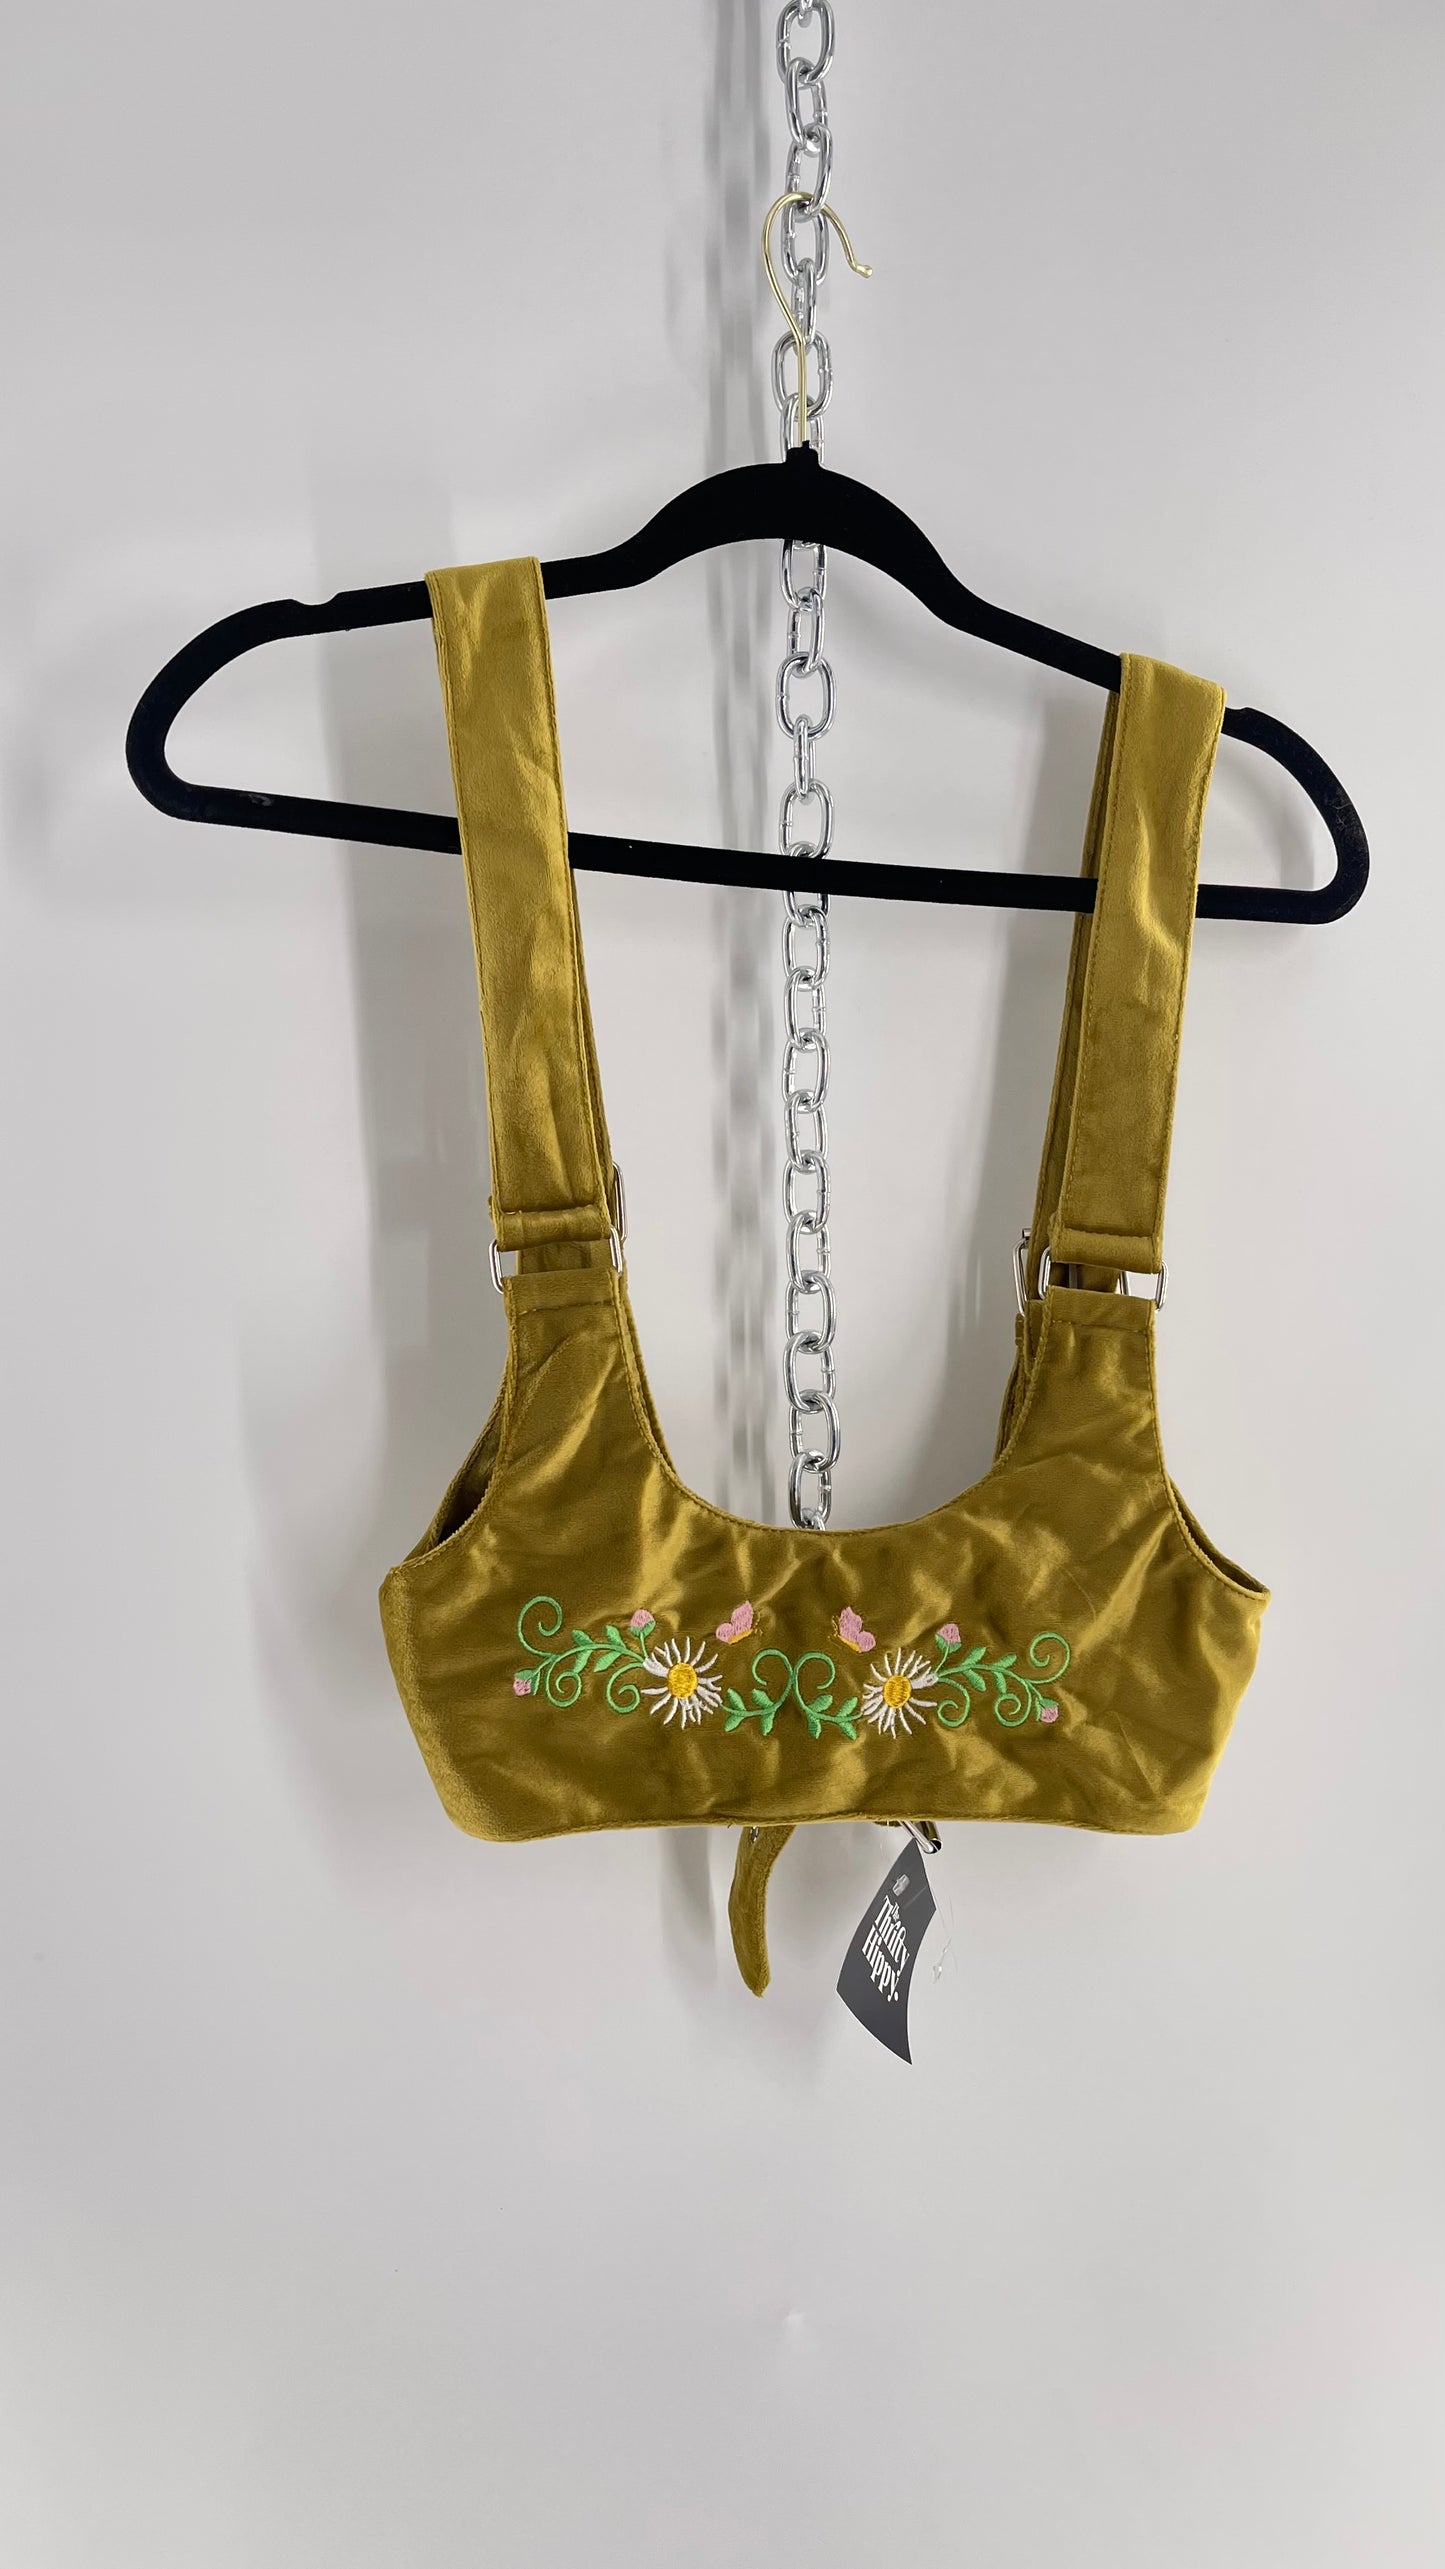 Urban Outfitters Greenish Gold Velour Body Harness with Embroidered Daisies and Butterflies (Large)